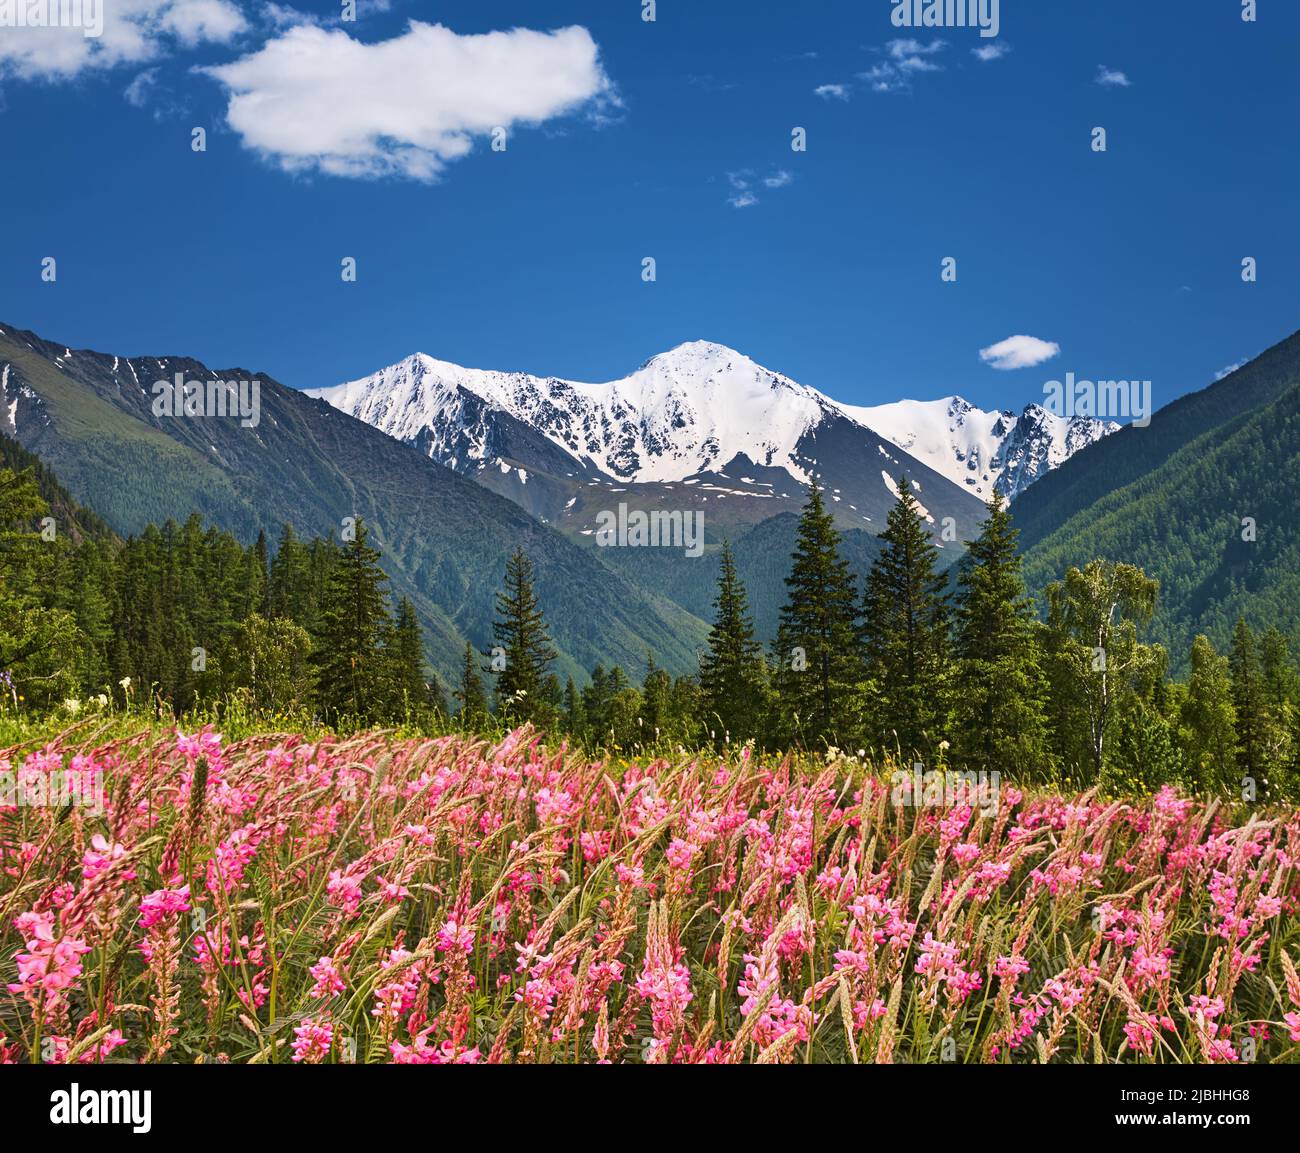 Landscape with blossoming field, blue sky and snowy mountains Stock Photo